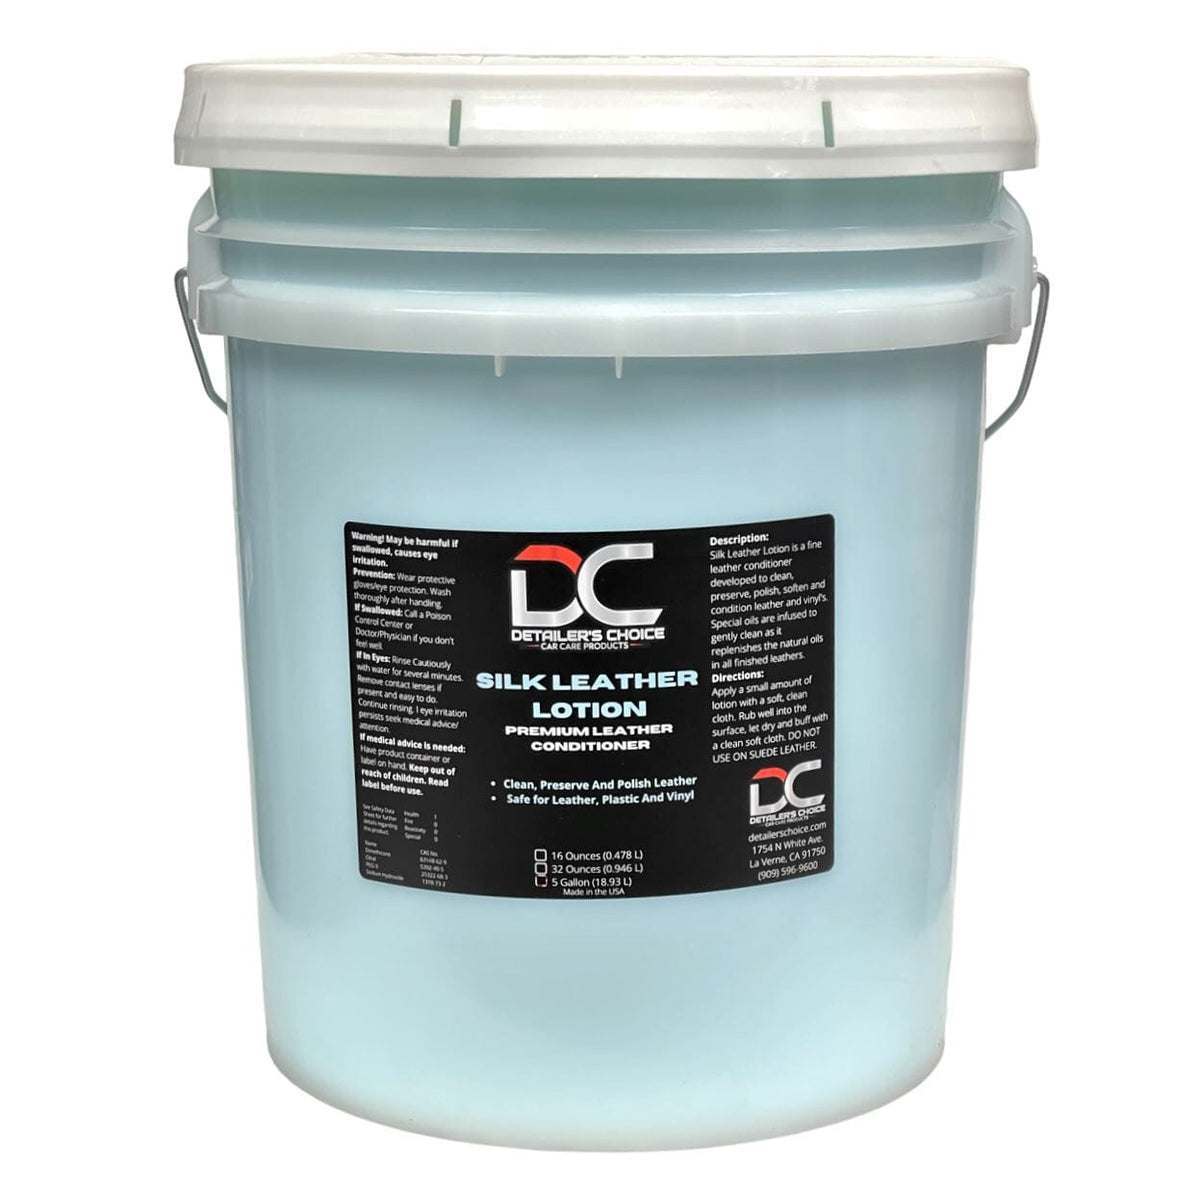 Surface Conditioner and Sealers - Diamond Paints Jamaica